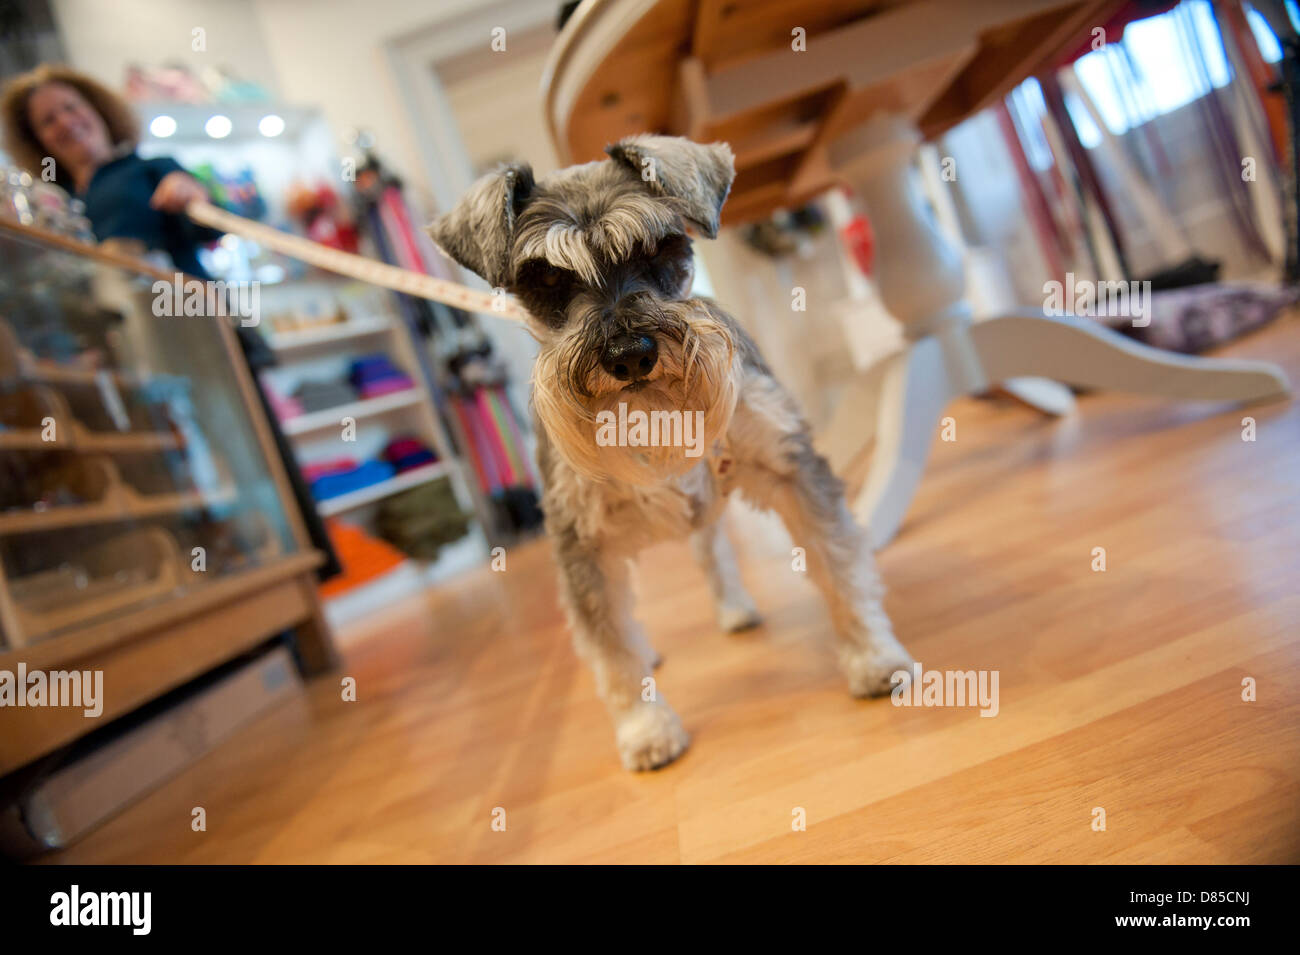 A small dog inside Collared. A dog accessory and gift shop in Hastings. East Sussex. England. UK Stock Photo